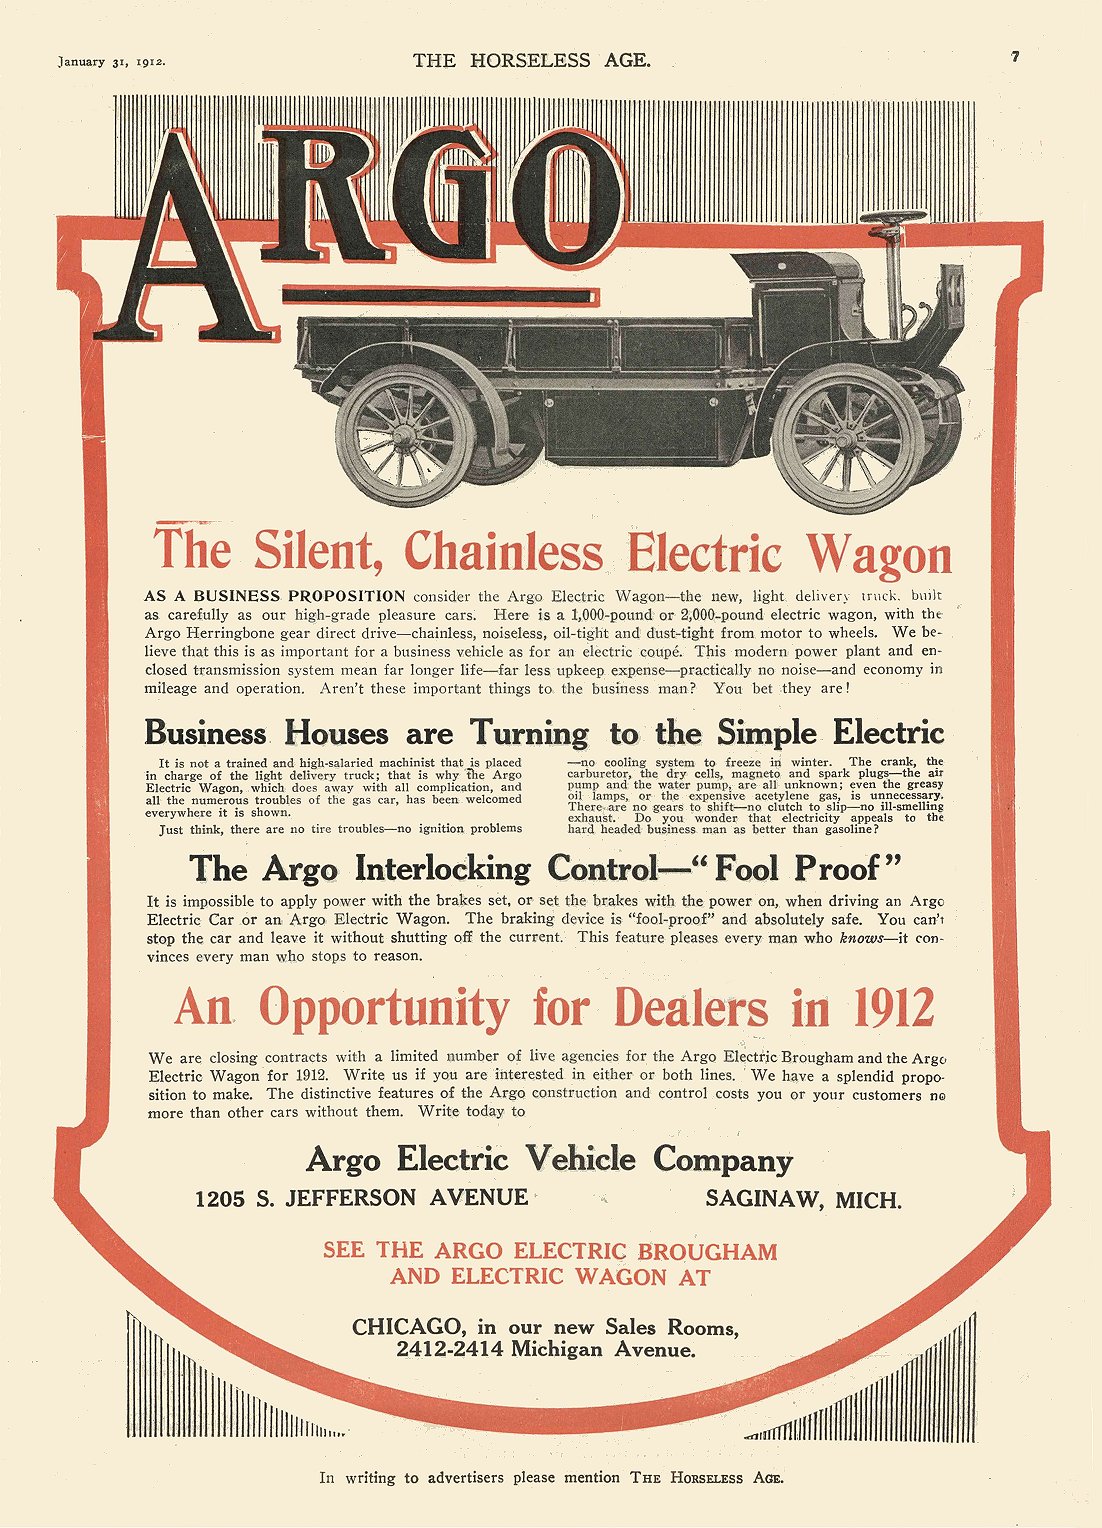 1912 10 23 ARGO Electric The Silent, Chainless Electric Wagon Argo Electric Vehicles Co Saginaw, MICH THE HORSELESS AGE October 23, 1912